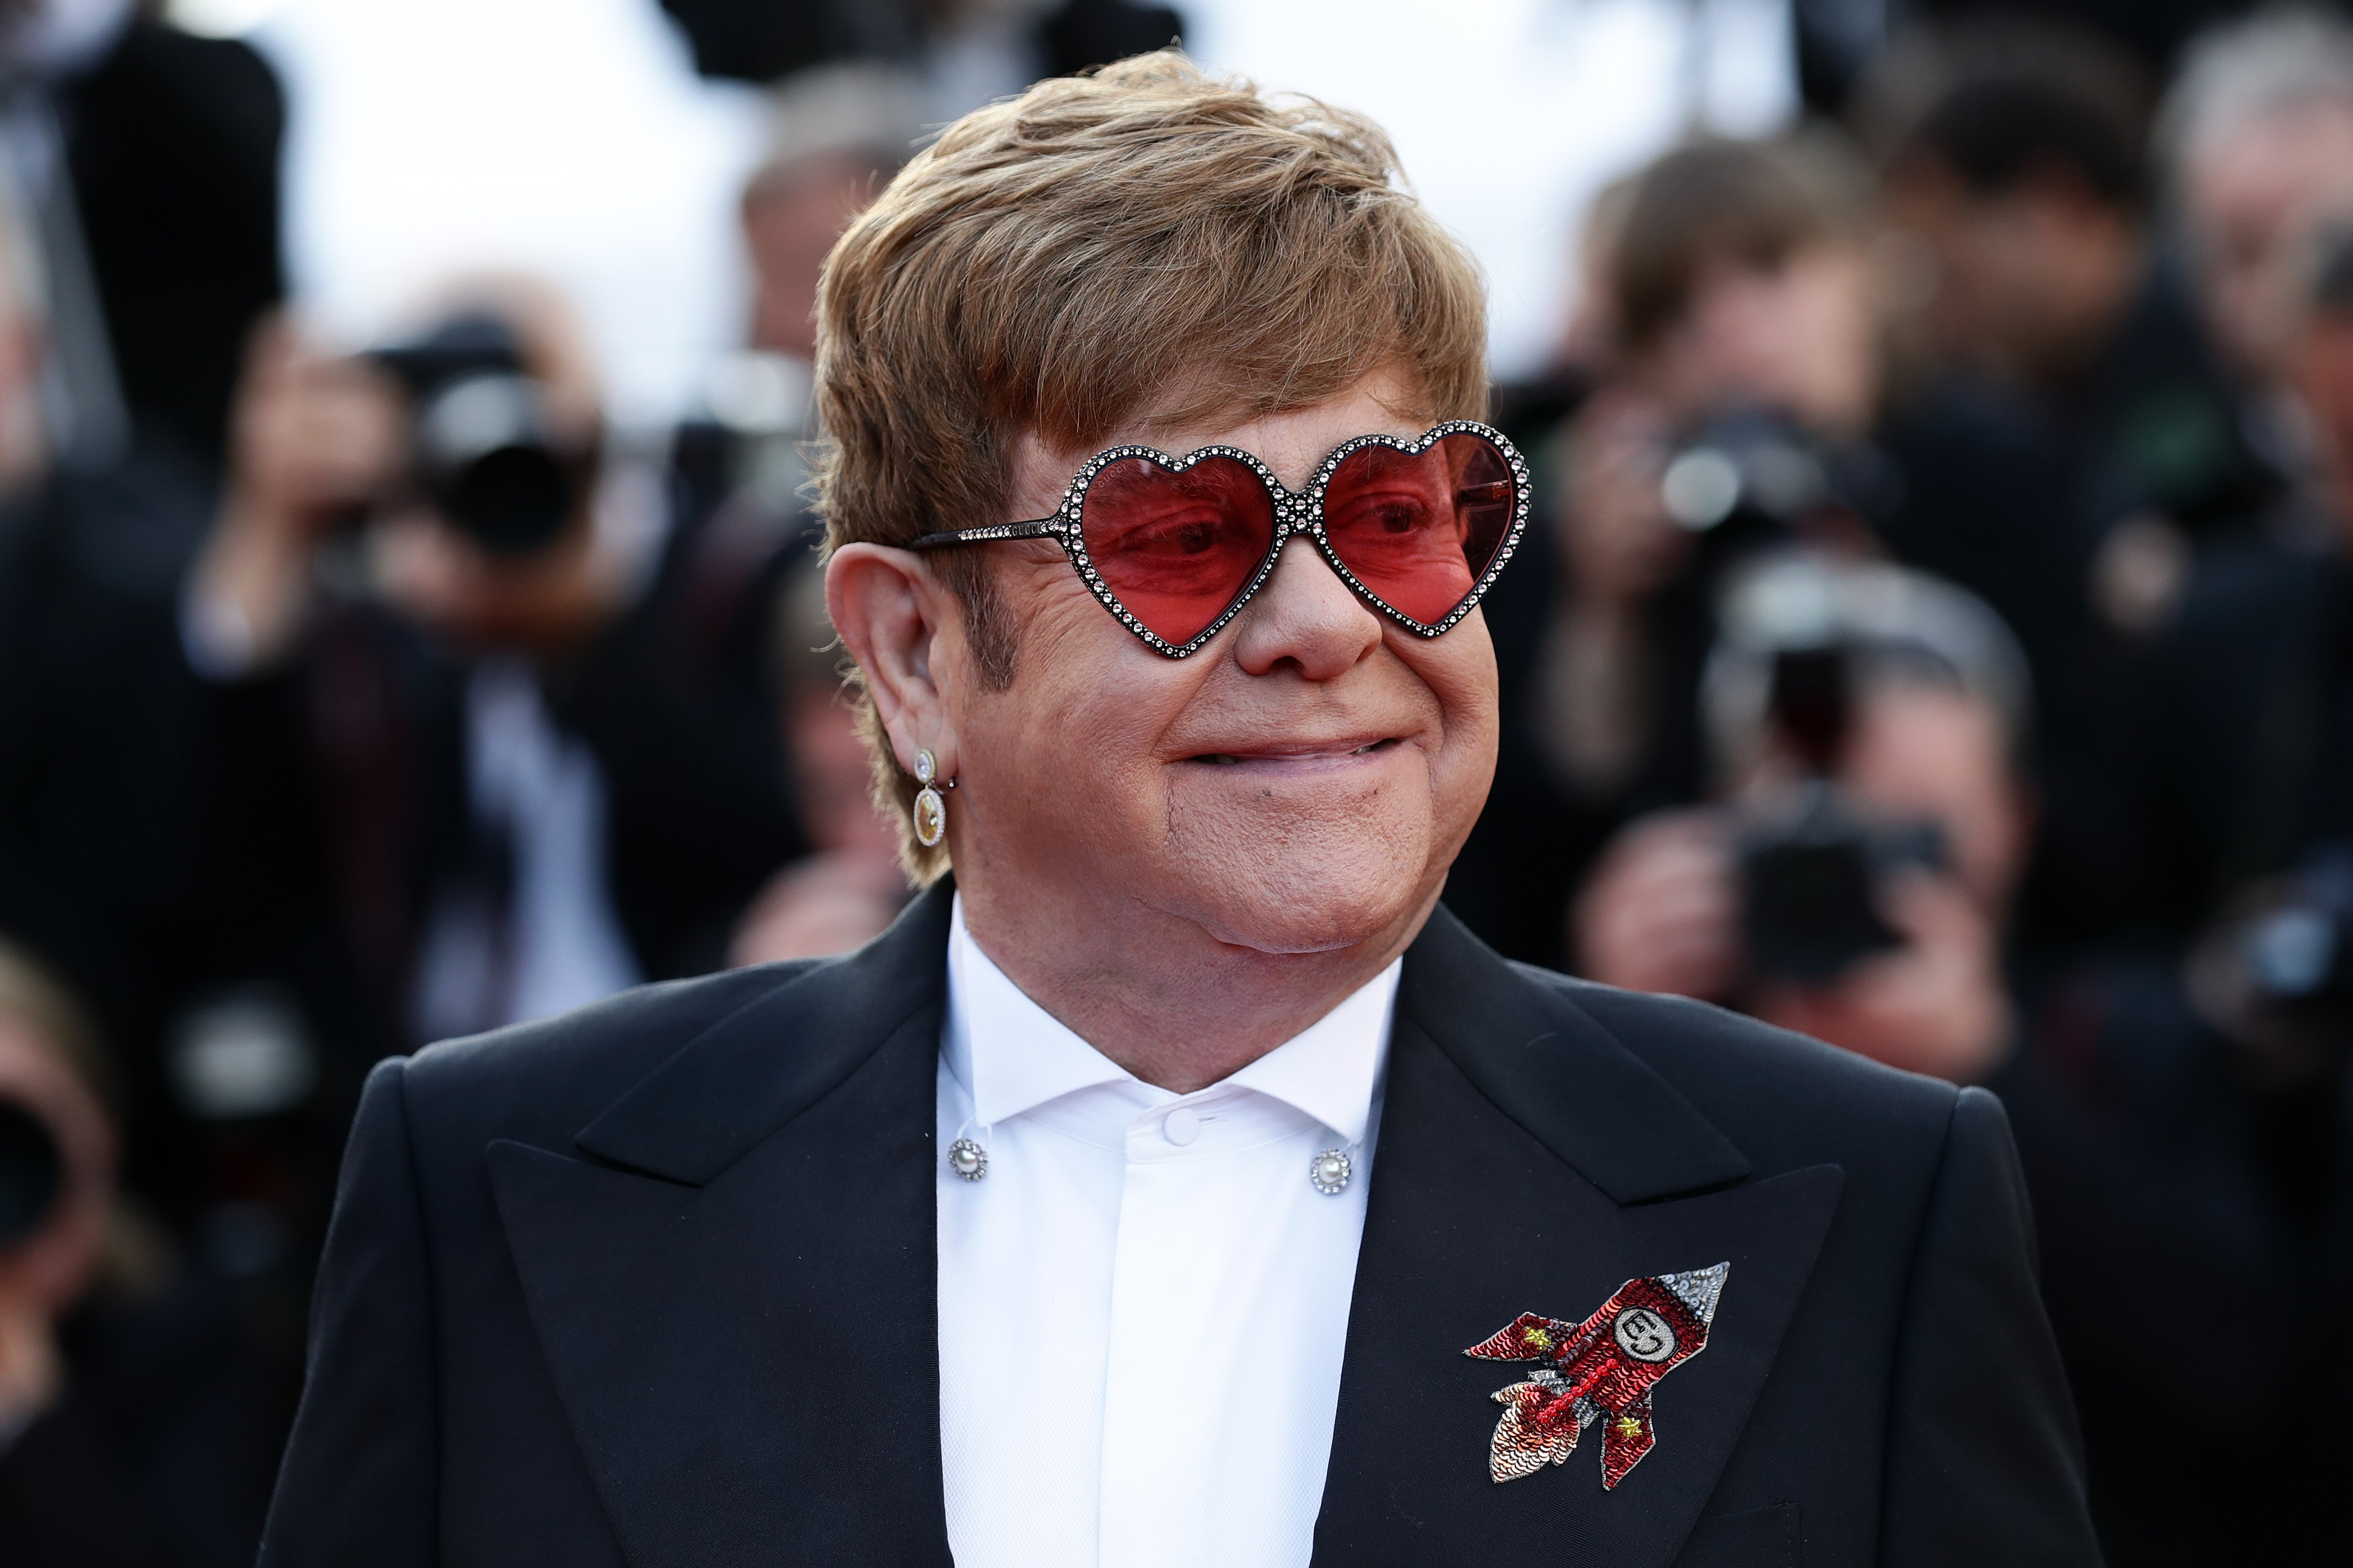 Sir Elton John at the screening of "Rocketman" during the 72nd annual Cannes Film Festival on May 16, 2019 | Photo: Getty Images